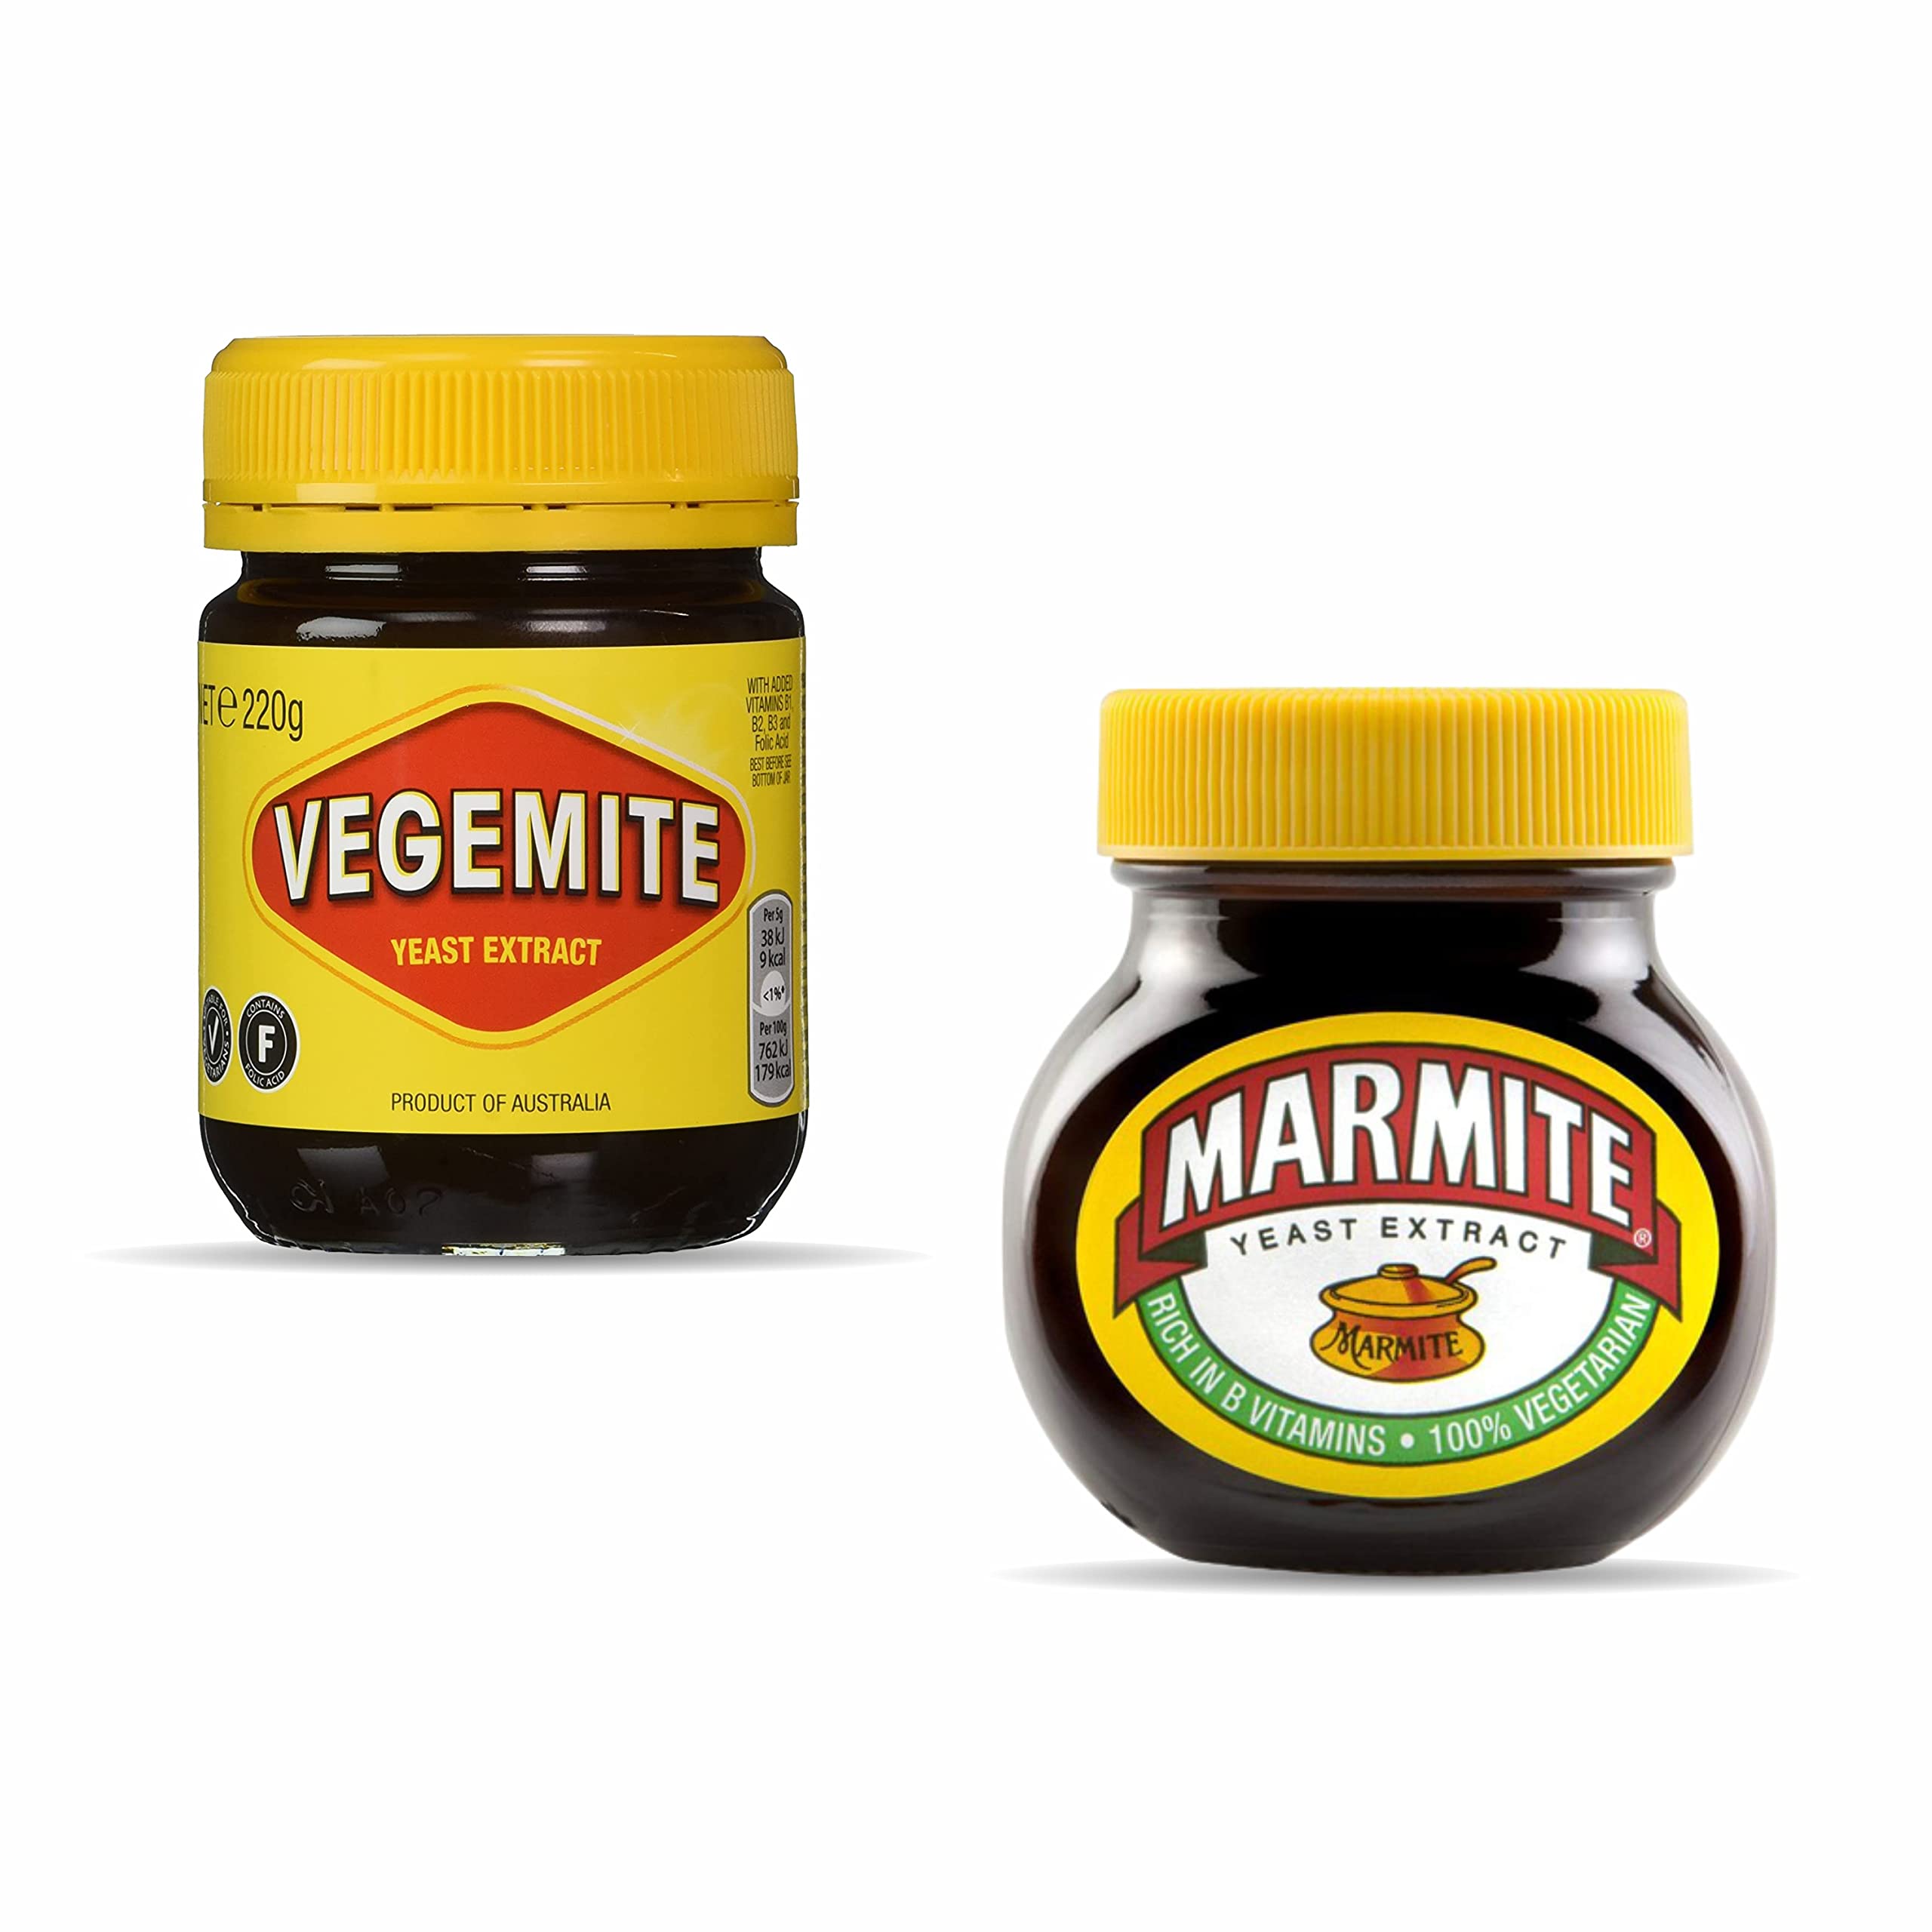 Marmite Yeast Extract (250g) - Pack of 2